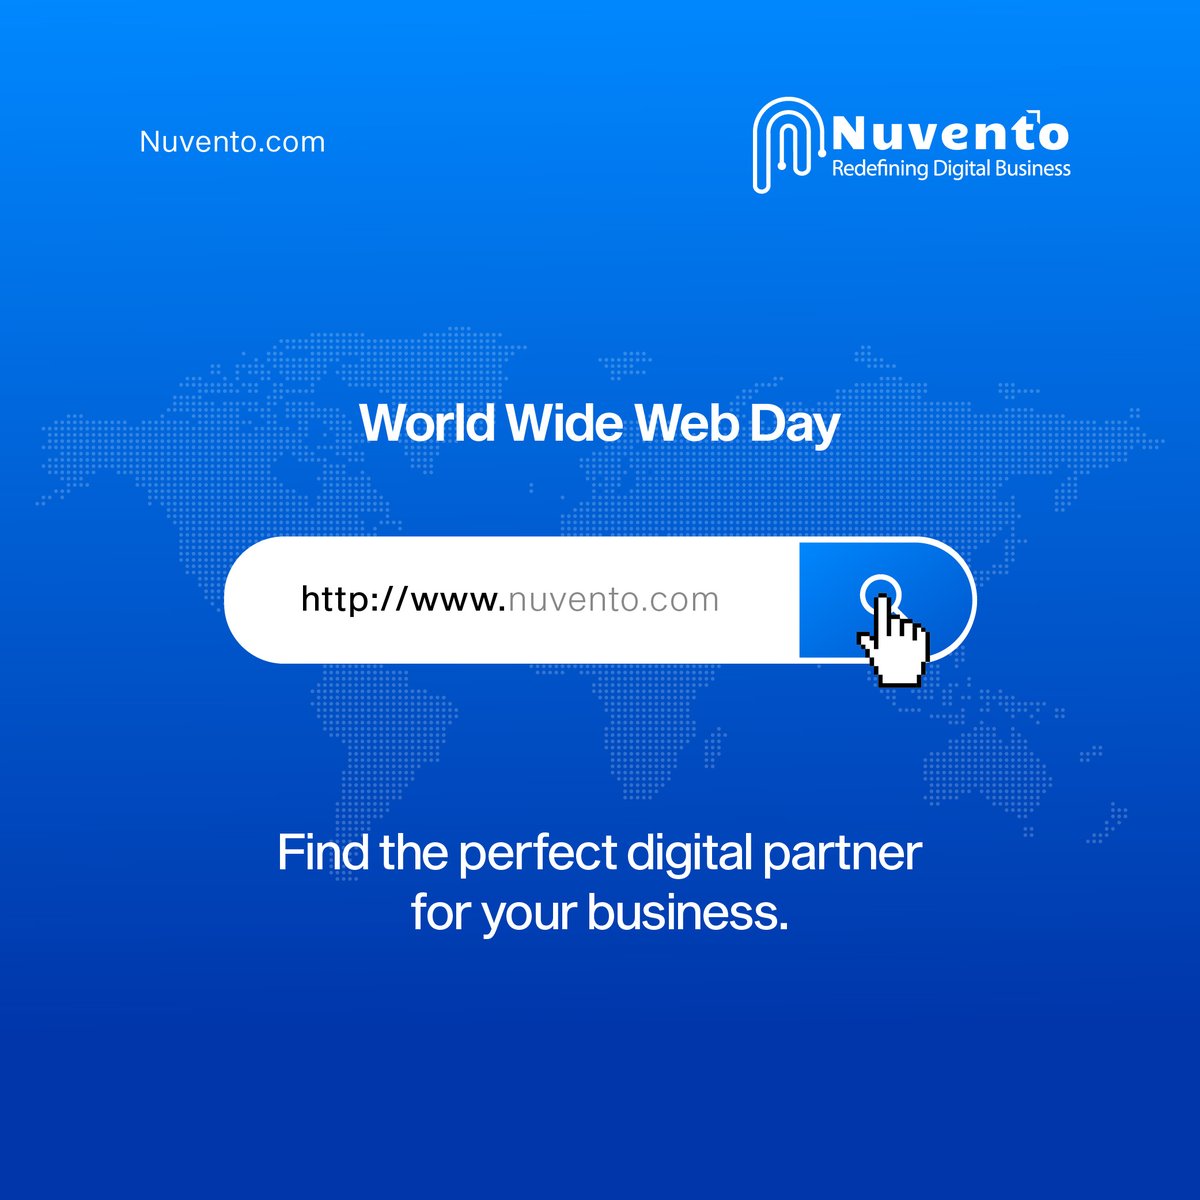 A world without internet connectivity is unimaginable!

Let's celebrate this extraordinary invention that connects us all, bringing knowledge, communication, and endless possibilities right at our fingertips.

#worldwideweb #wwwday #connectivity #digitalpartner